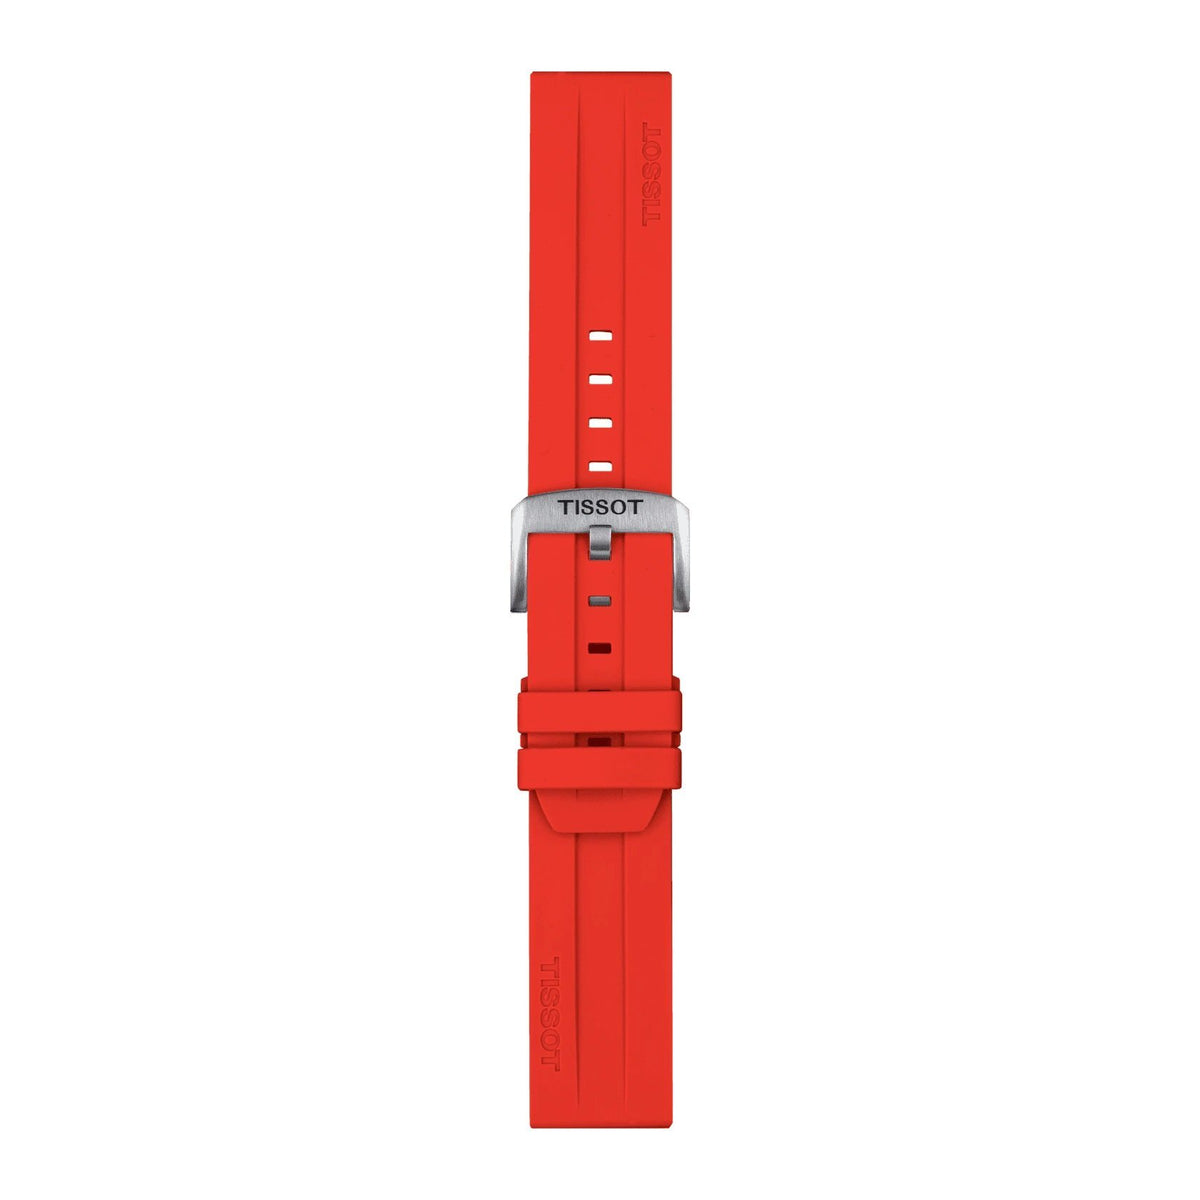 Official Tissot RED SILICONE strap ANSA 22 MM T852047920